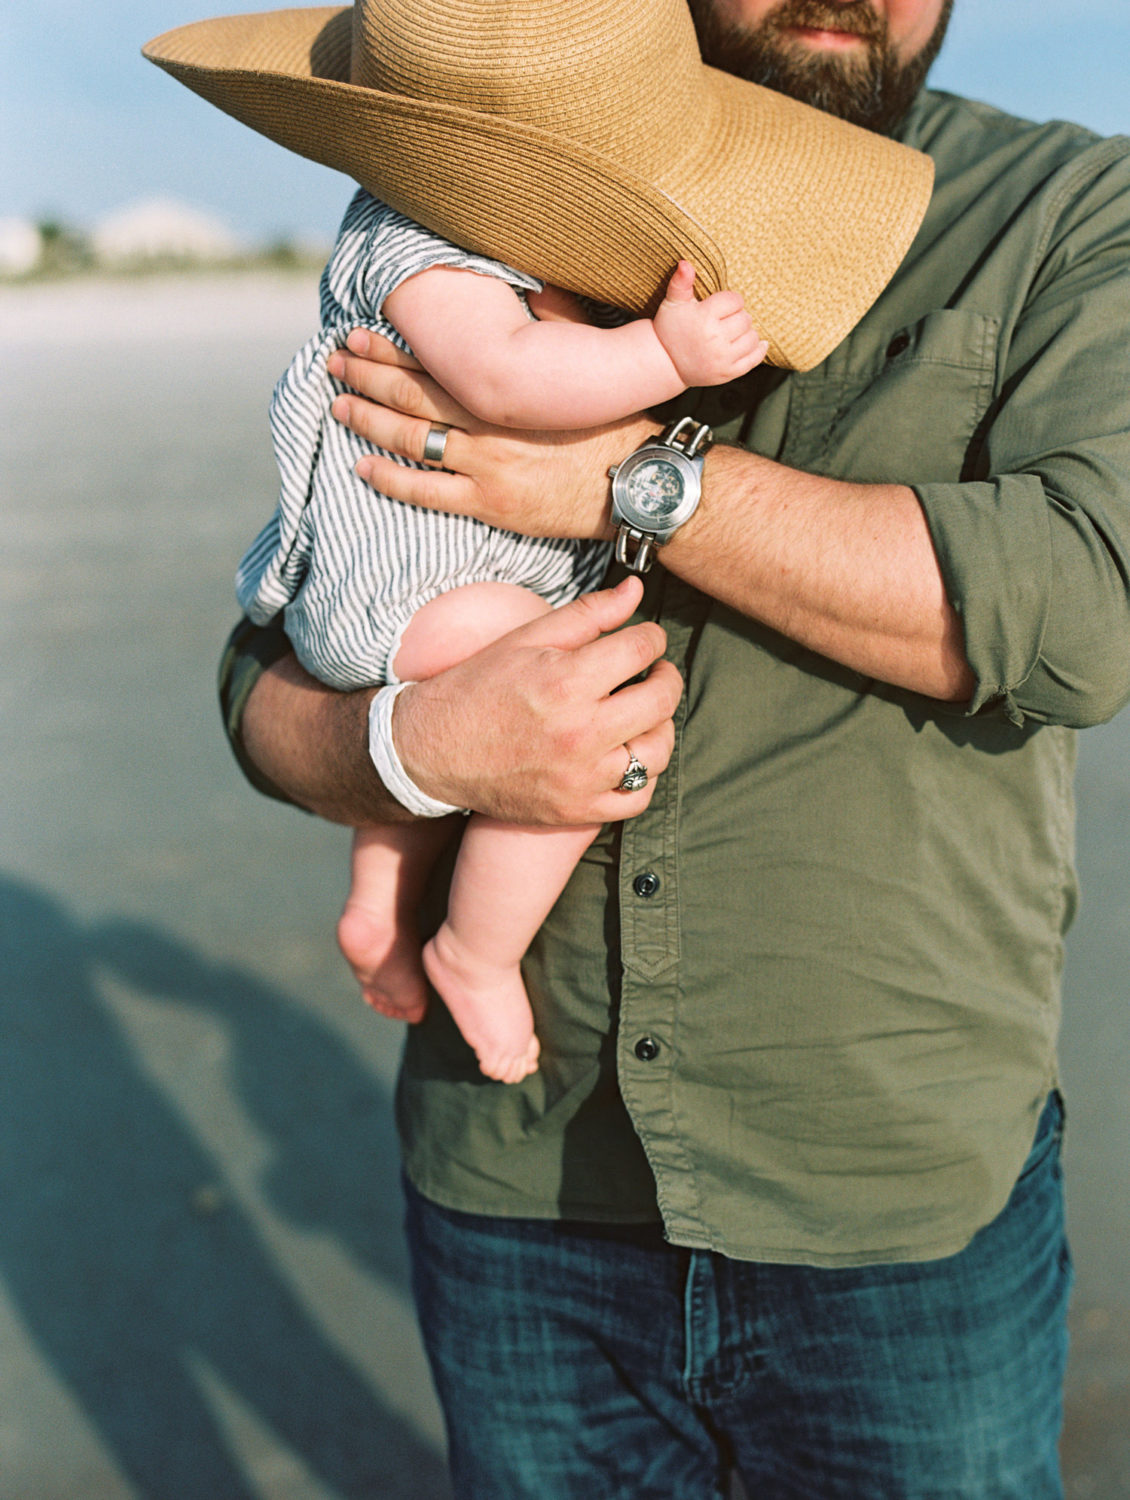 baby girl in striped romper wearing mom's sunhat while dad in green shirt holds her.